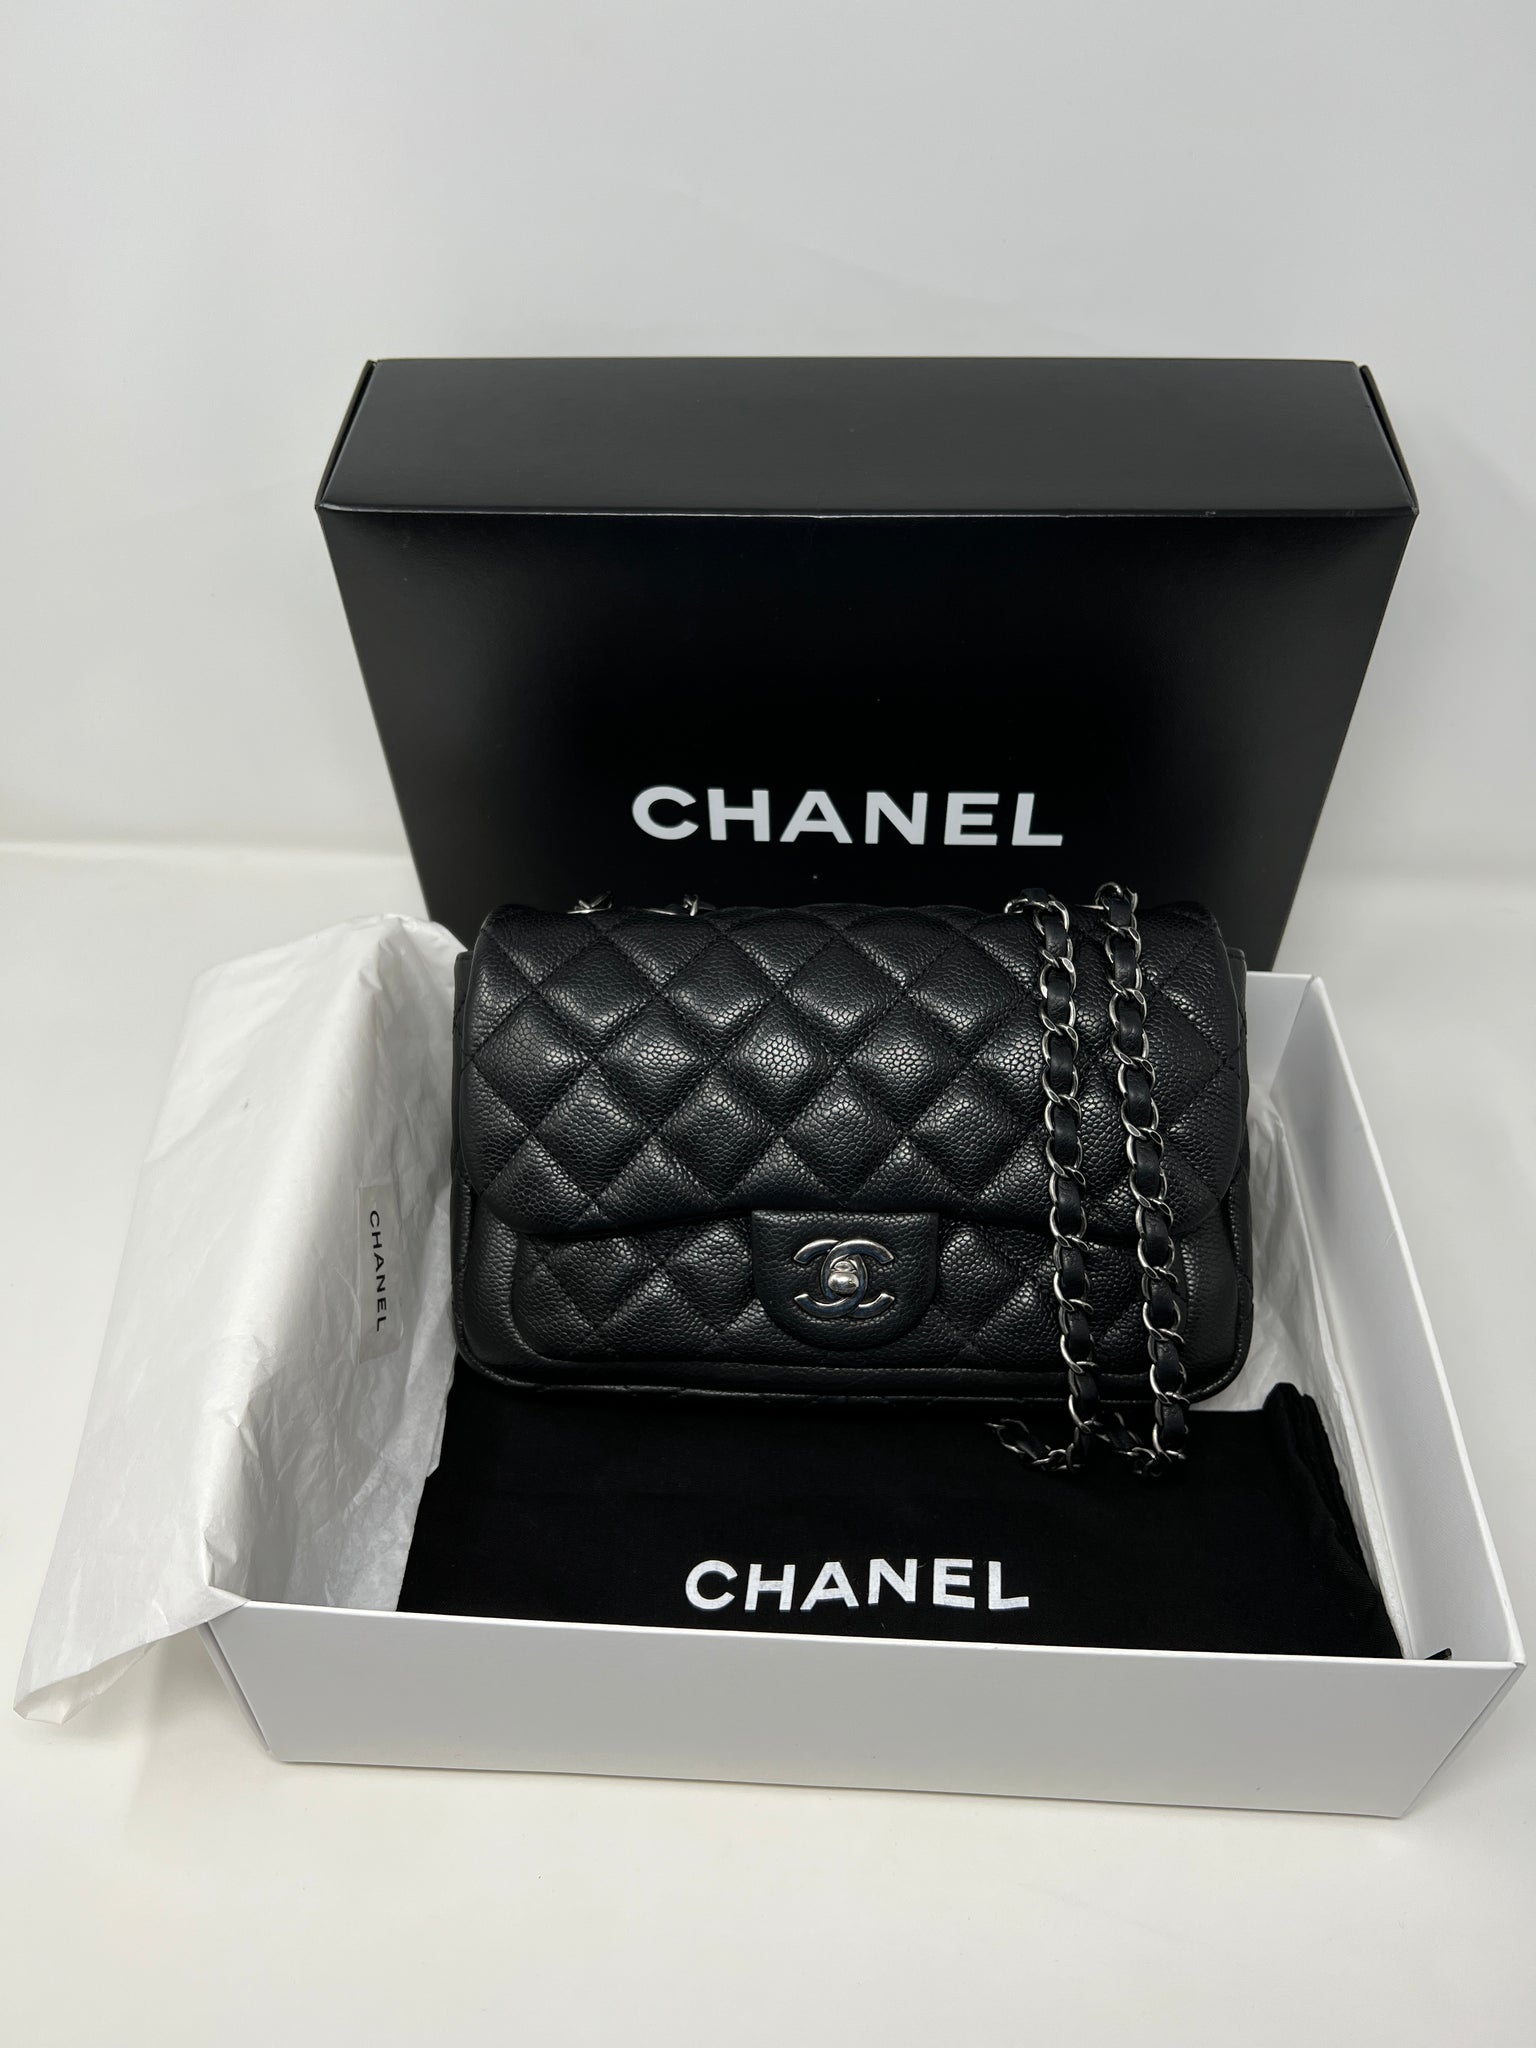 Chanel Red Quilted Lambskin Forever Small Hobo Bag